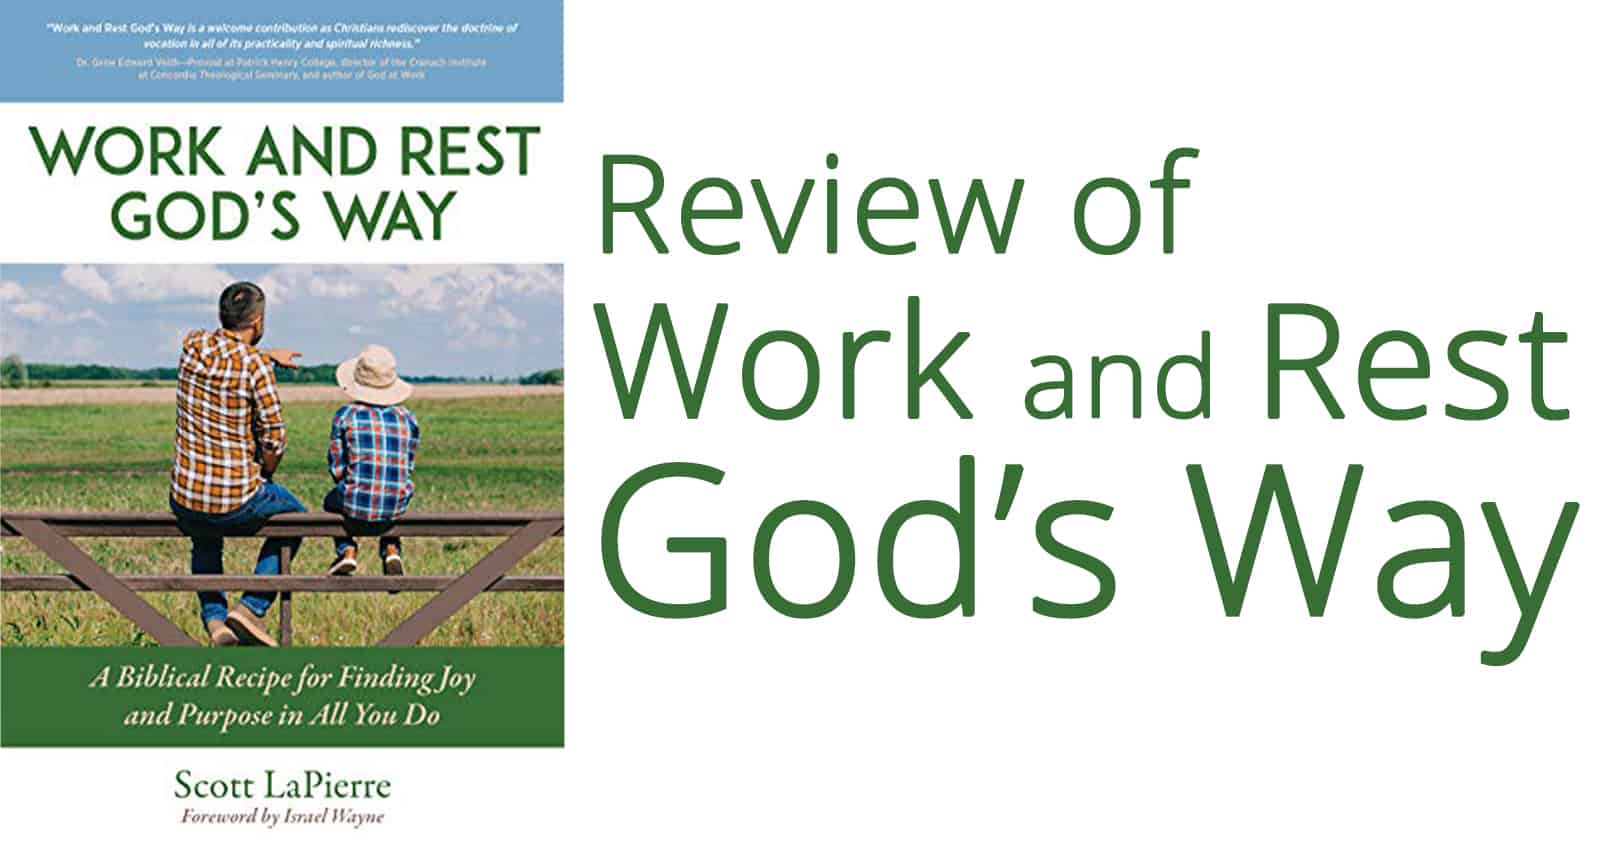 Review of Work and Rest God's Way